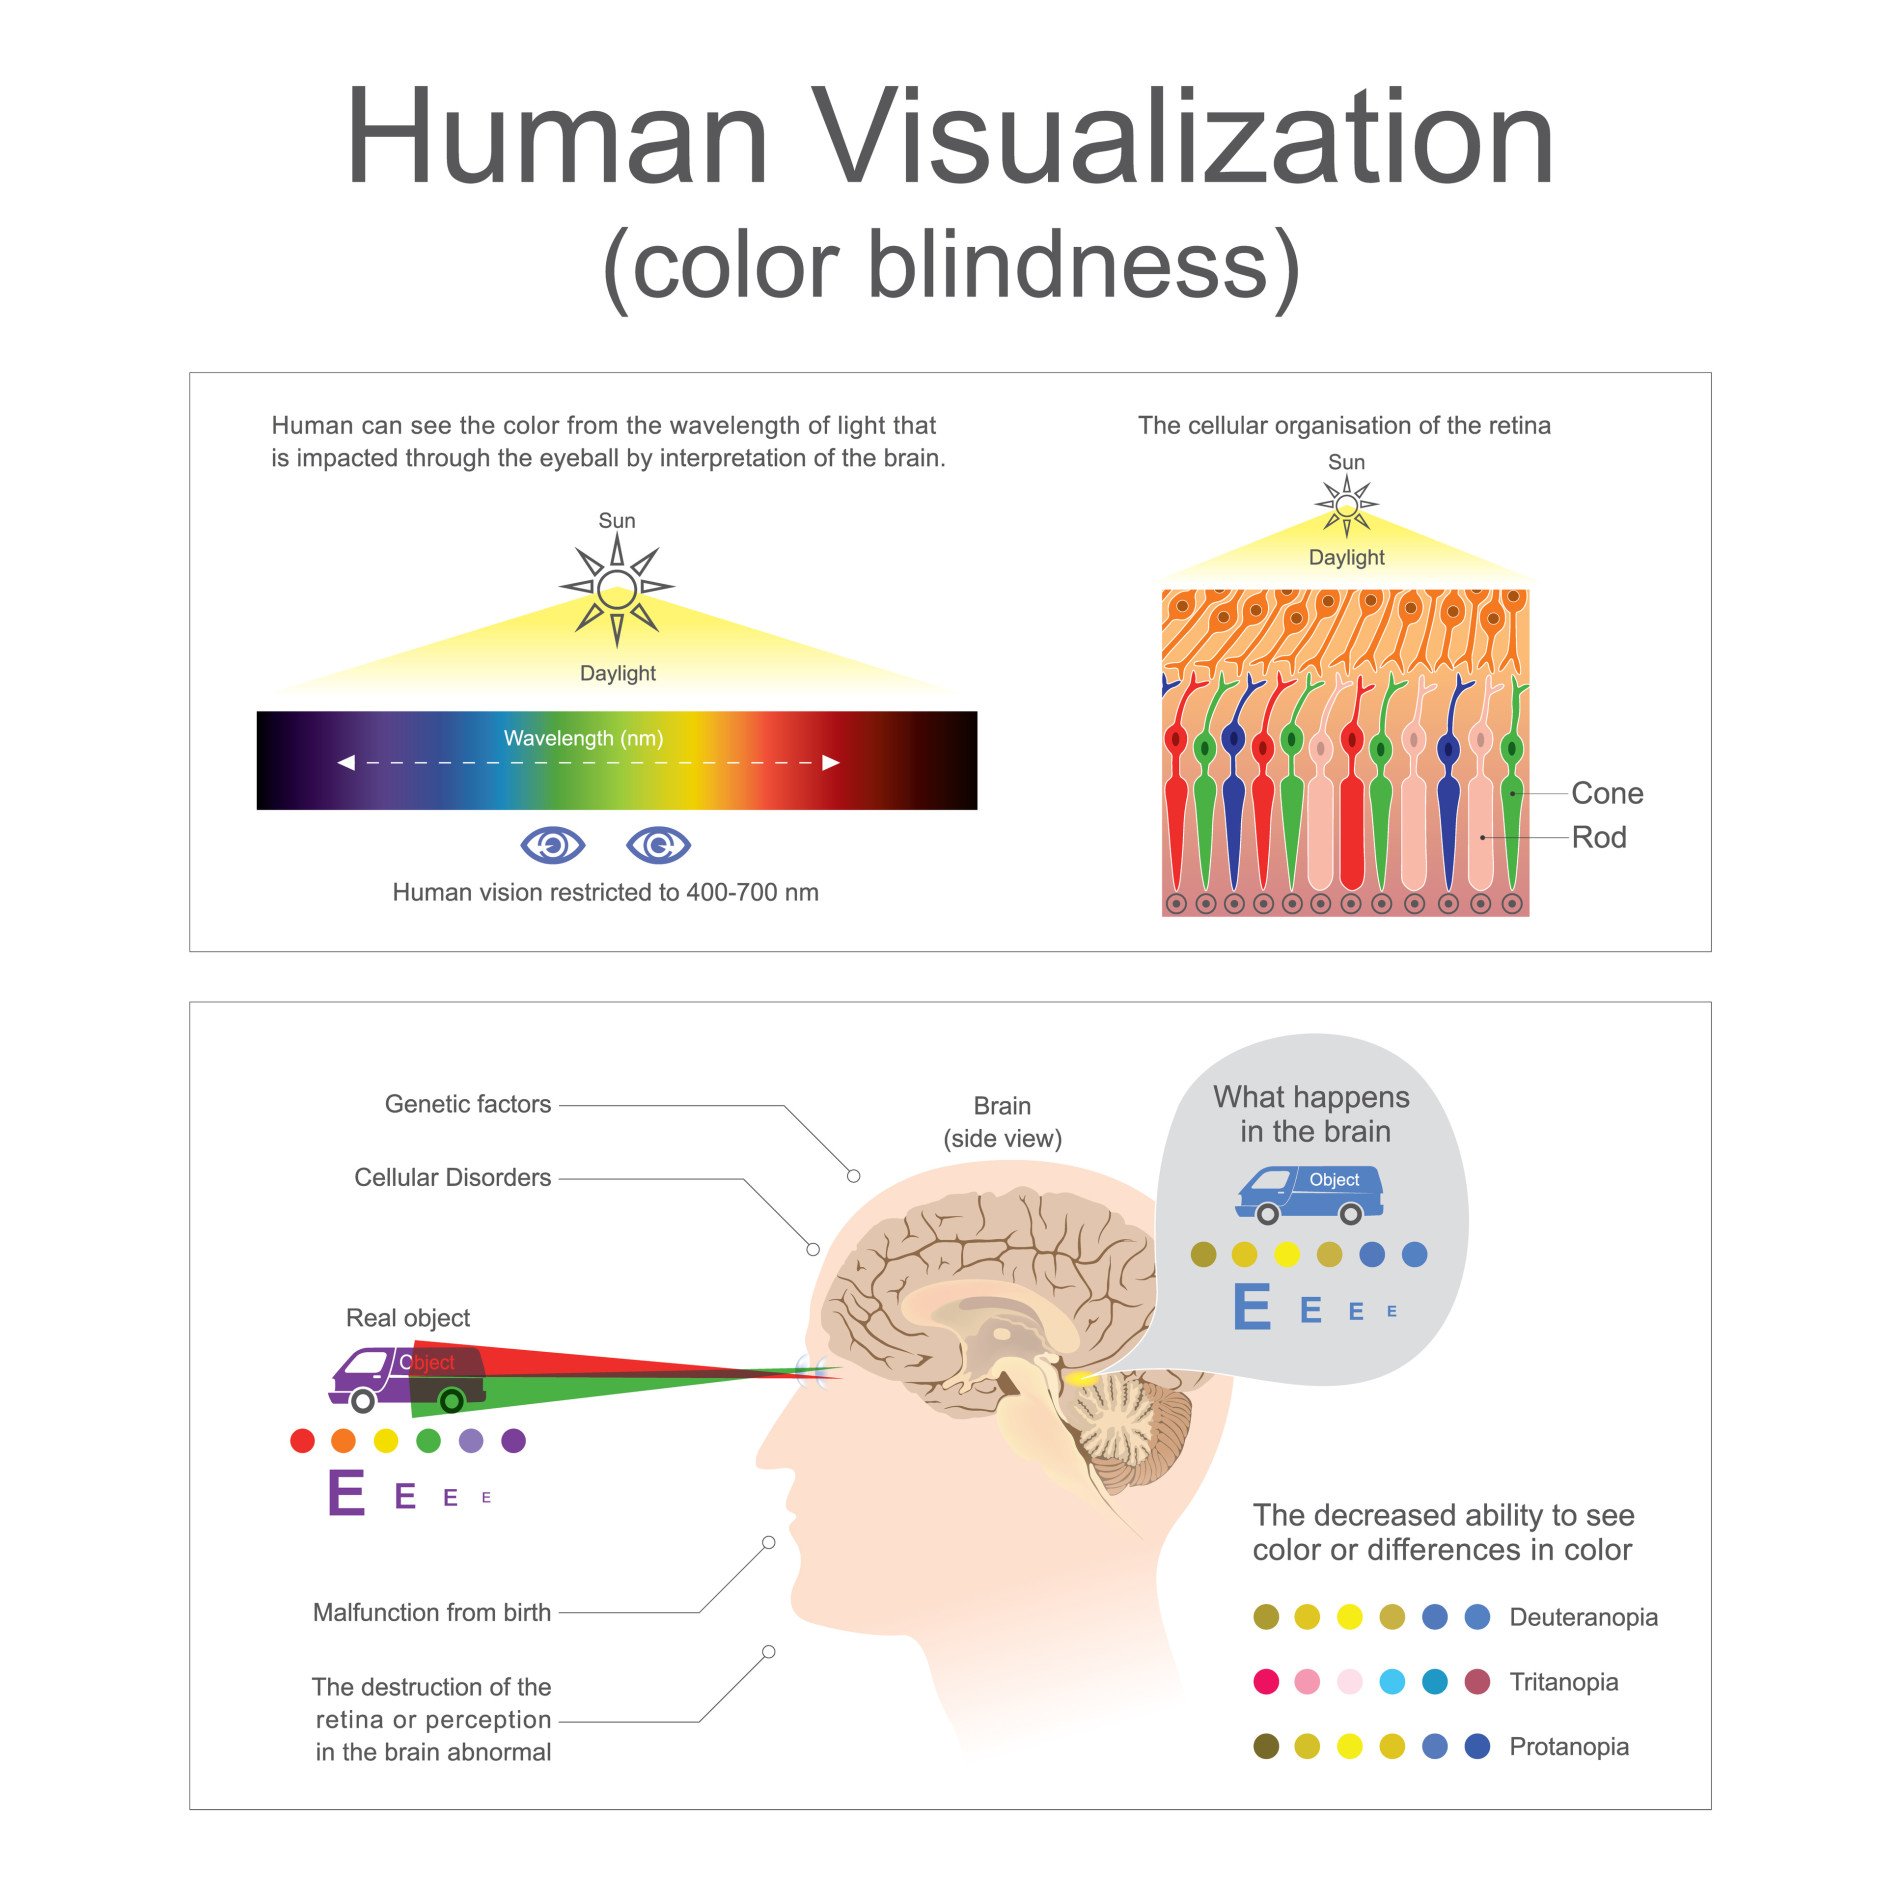 Human can see the color from wavelength of light. The destruction of the retina or perception in the brain abnormal.